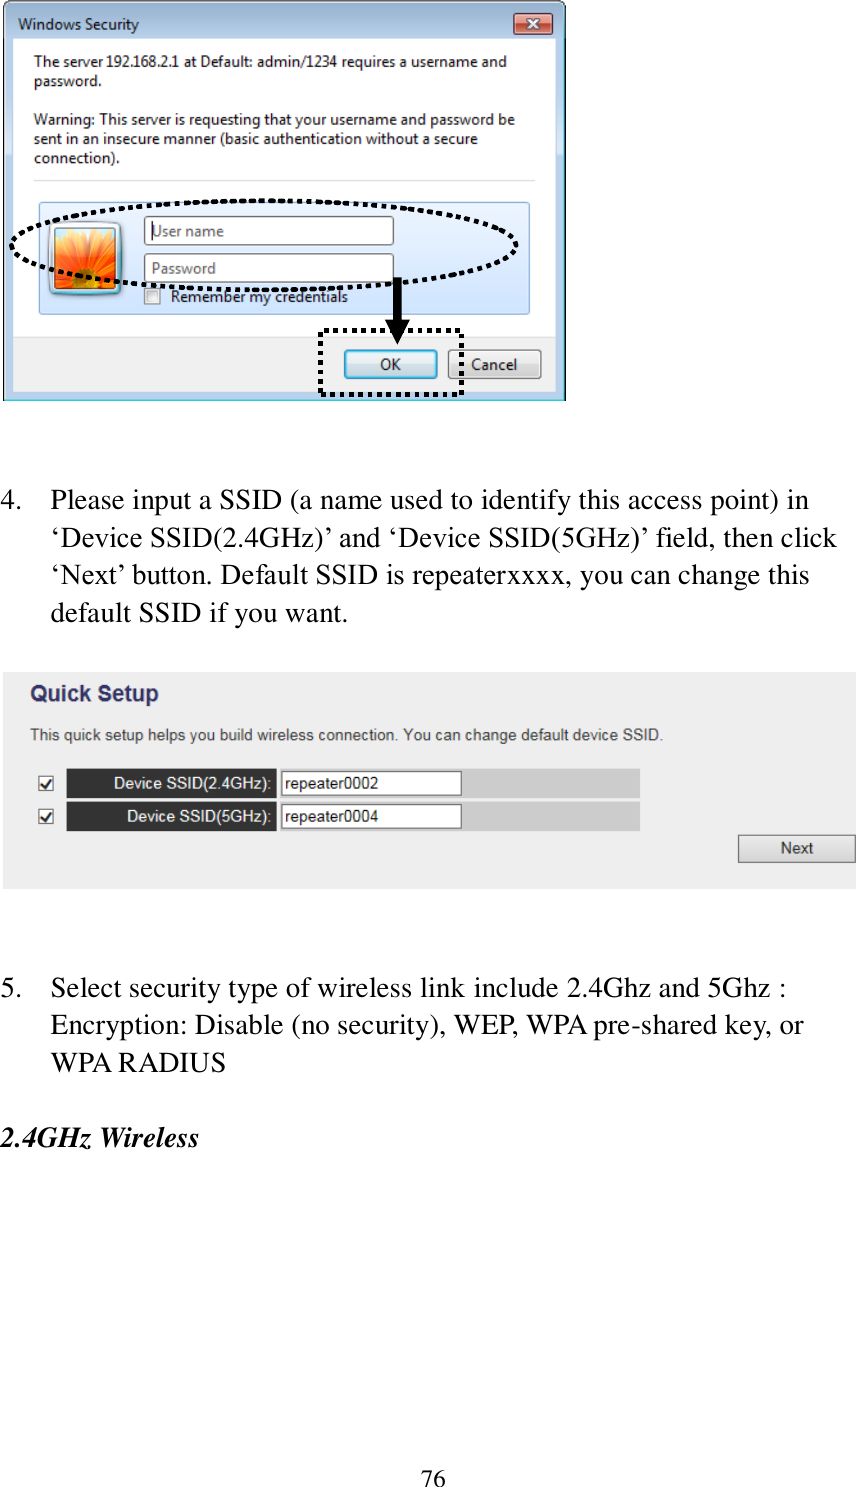 76    4. Please input a SSID (a name used to identify this access point) in ‘Device SSID(2.4GHz)’ and ‘Device SSID(5GHz)’ field, then click ‘Next’ button. Default SSID is repeaterxxxx, you can change this default SSID if you want.     5. Select security type of wireless link include 2.4Ghz and 5Ghz : Encryption: Disable (no security), WEP, WPA pre-shared key, or WPA RADIUS  2.4GHz Wireless  